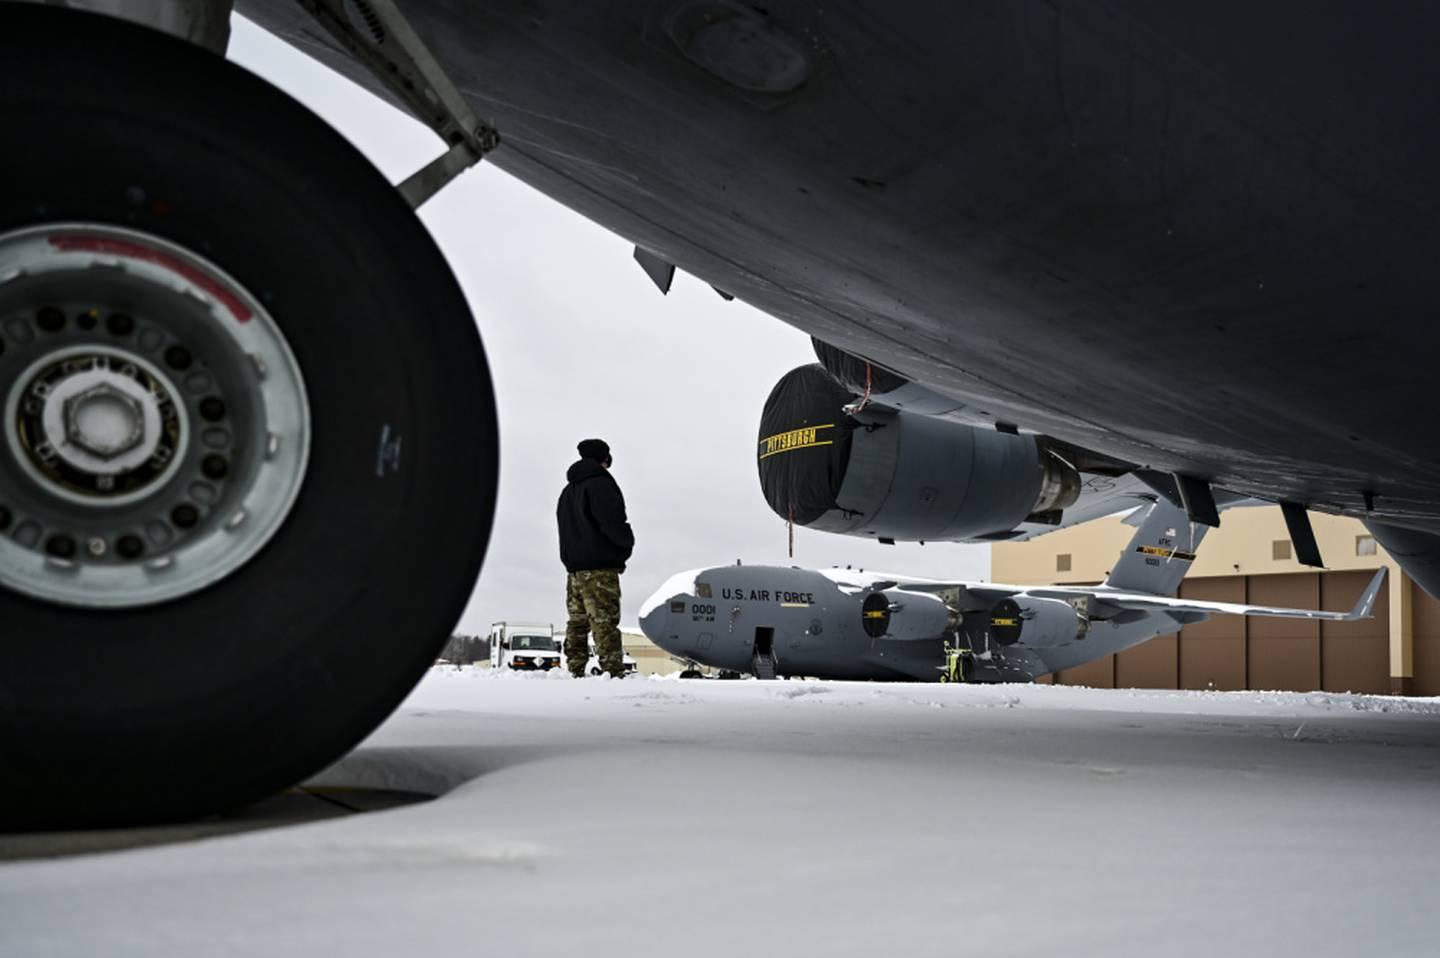 An Airman assigned to the 911th Aircraft Maintenance Squadron conducts a walk-around inspection on a C-17 Globemaster III at the Pittsburgh International Airport Air Reserve Station, Pennsylvania, on Feb. 1, 2021. (Joshua  Hair, hands and hosiery: Air Force overhauling outdated rules on airmenâ€™s looks